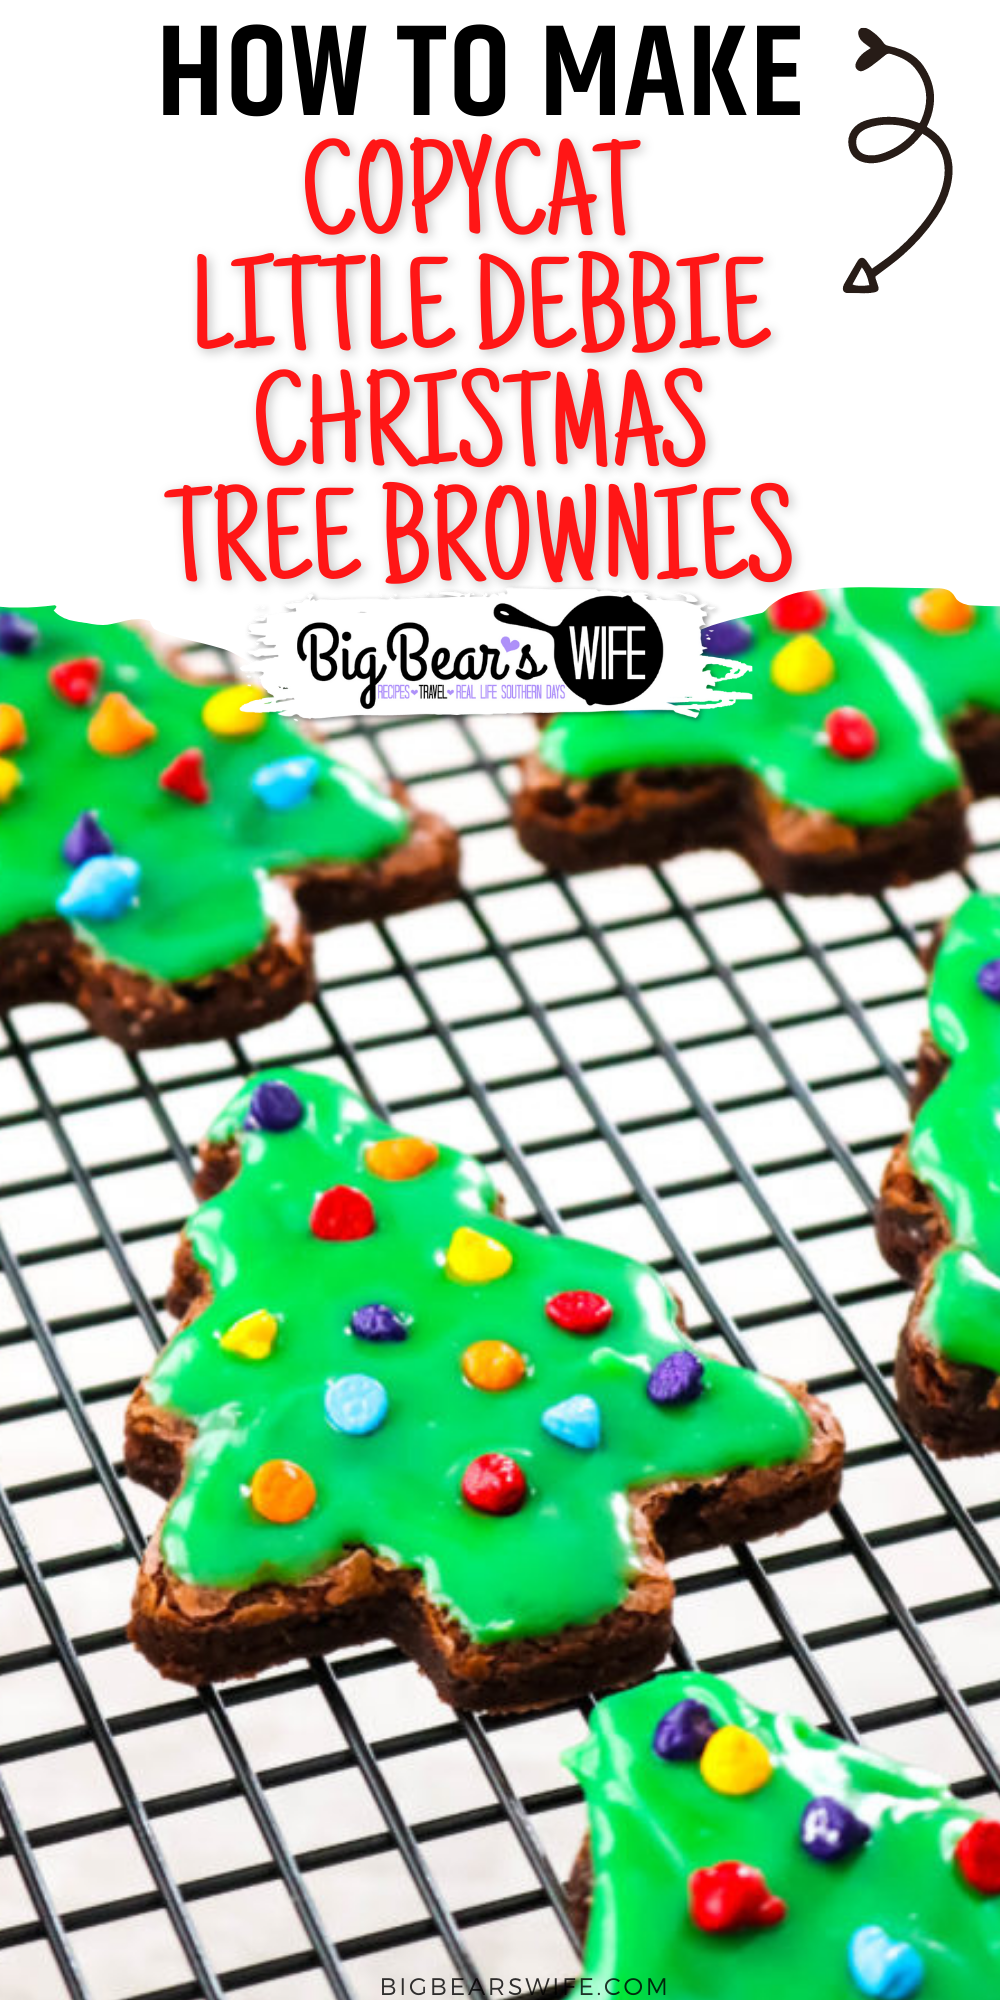 Little Debbie's Christmas Tree Brownies® are a nostalgic seasonal favorite. Jump in the kitchen and let's bake up some homemade brownie trees and decorate them with green ganache and candy-coated chocolate chips to create our very own Copycat Little Debbie Christmas Tree Brownies. via @bigbearswife